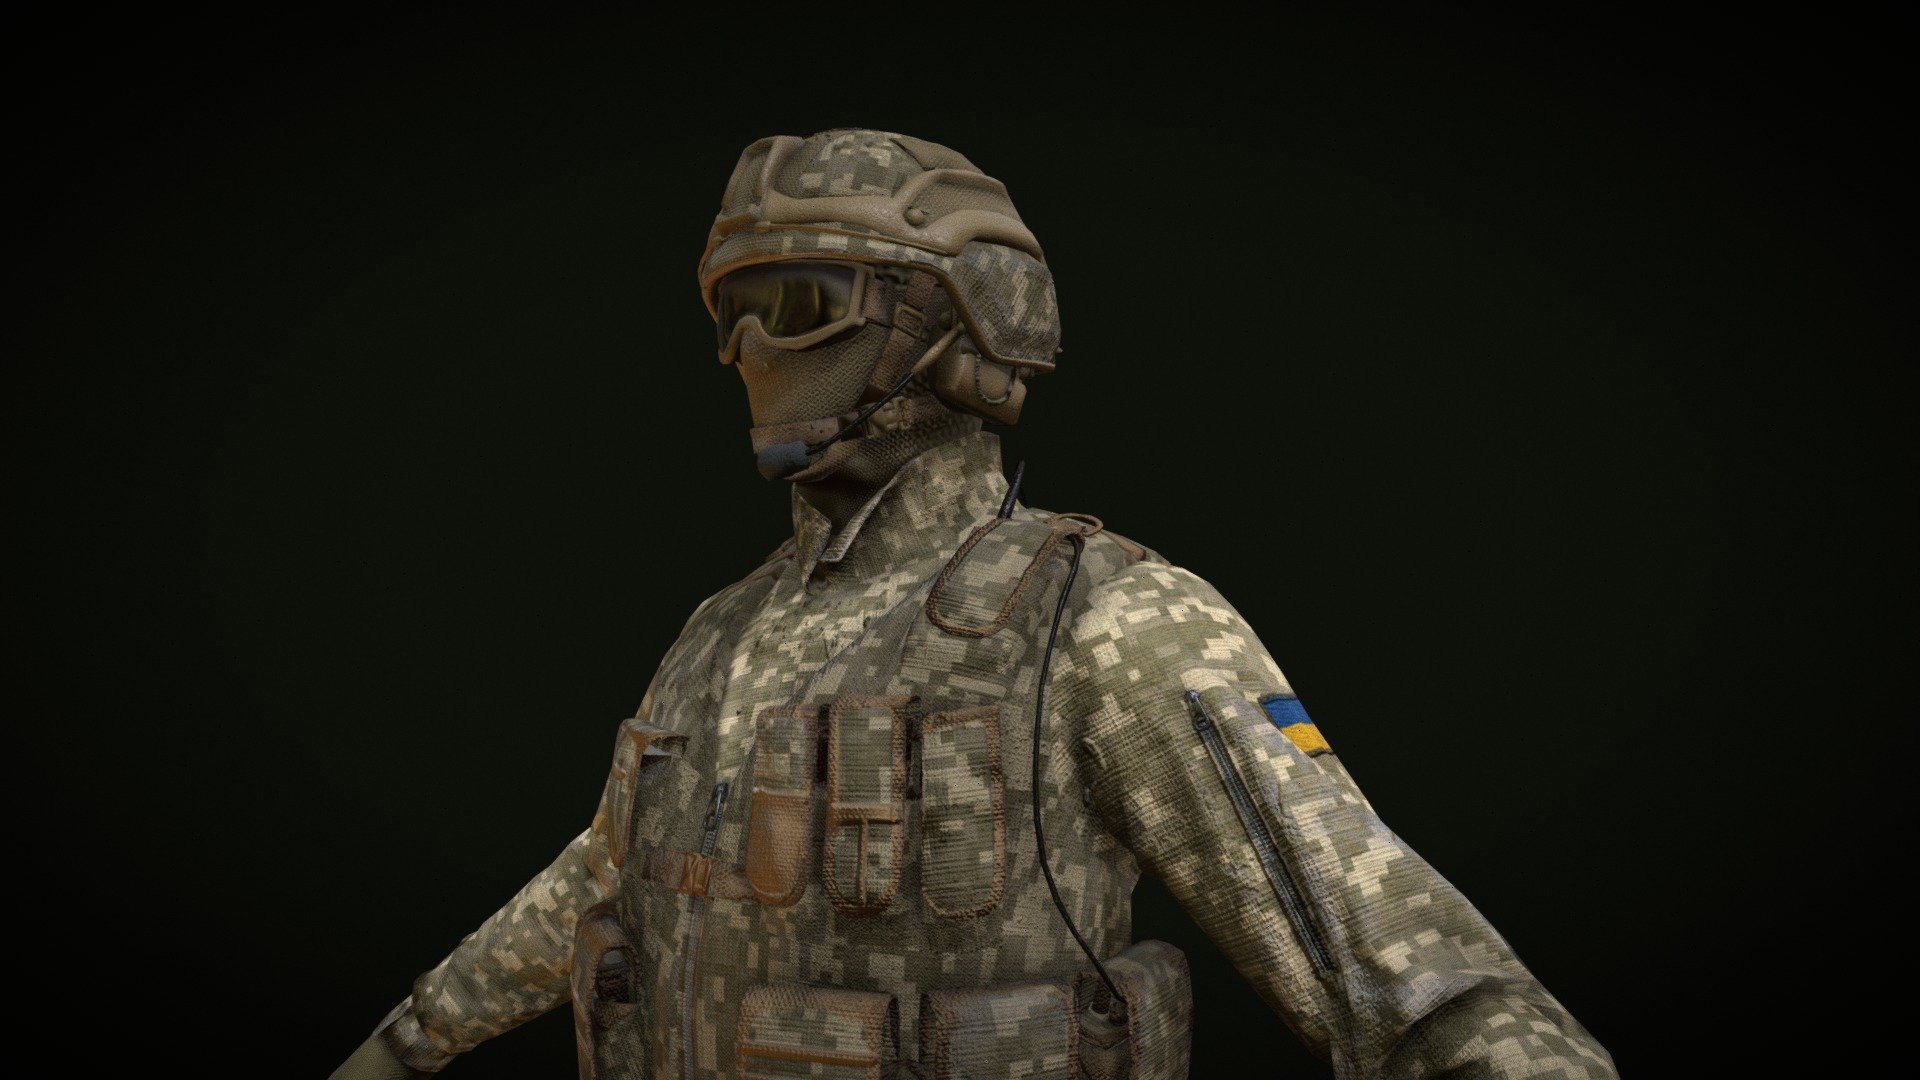 Ukrainian Soldier (optimized for games)

Donate to the armed forces of Ukraine: https://bank.gov.ua/ua/about/support-the-armed-forces

Слава Україні! - Ukrainian Soldier (optimized for games) - Download Free 3D model by Kovname 3d model